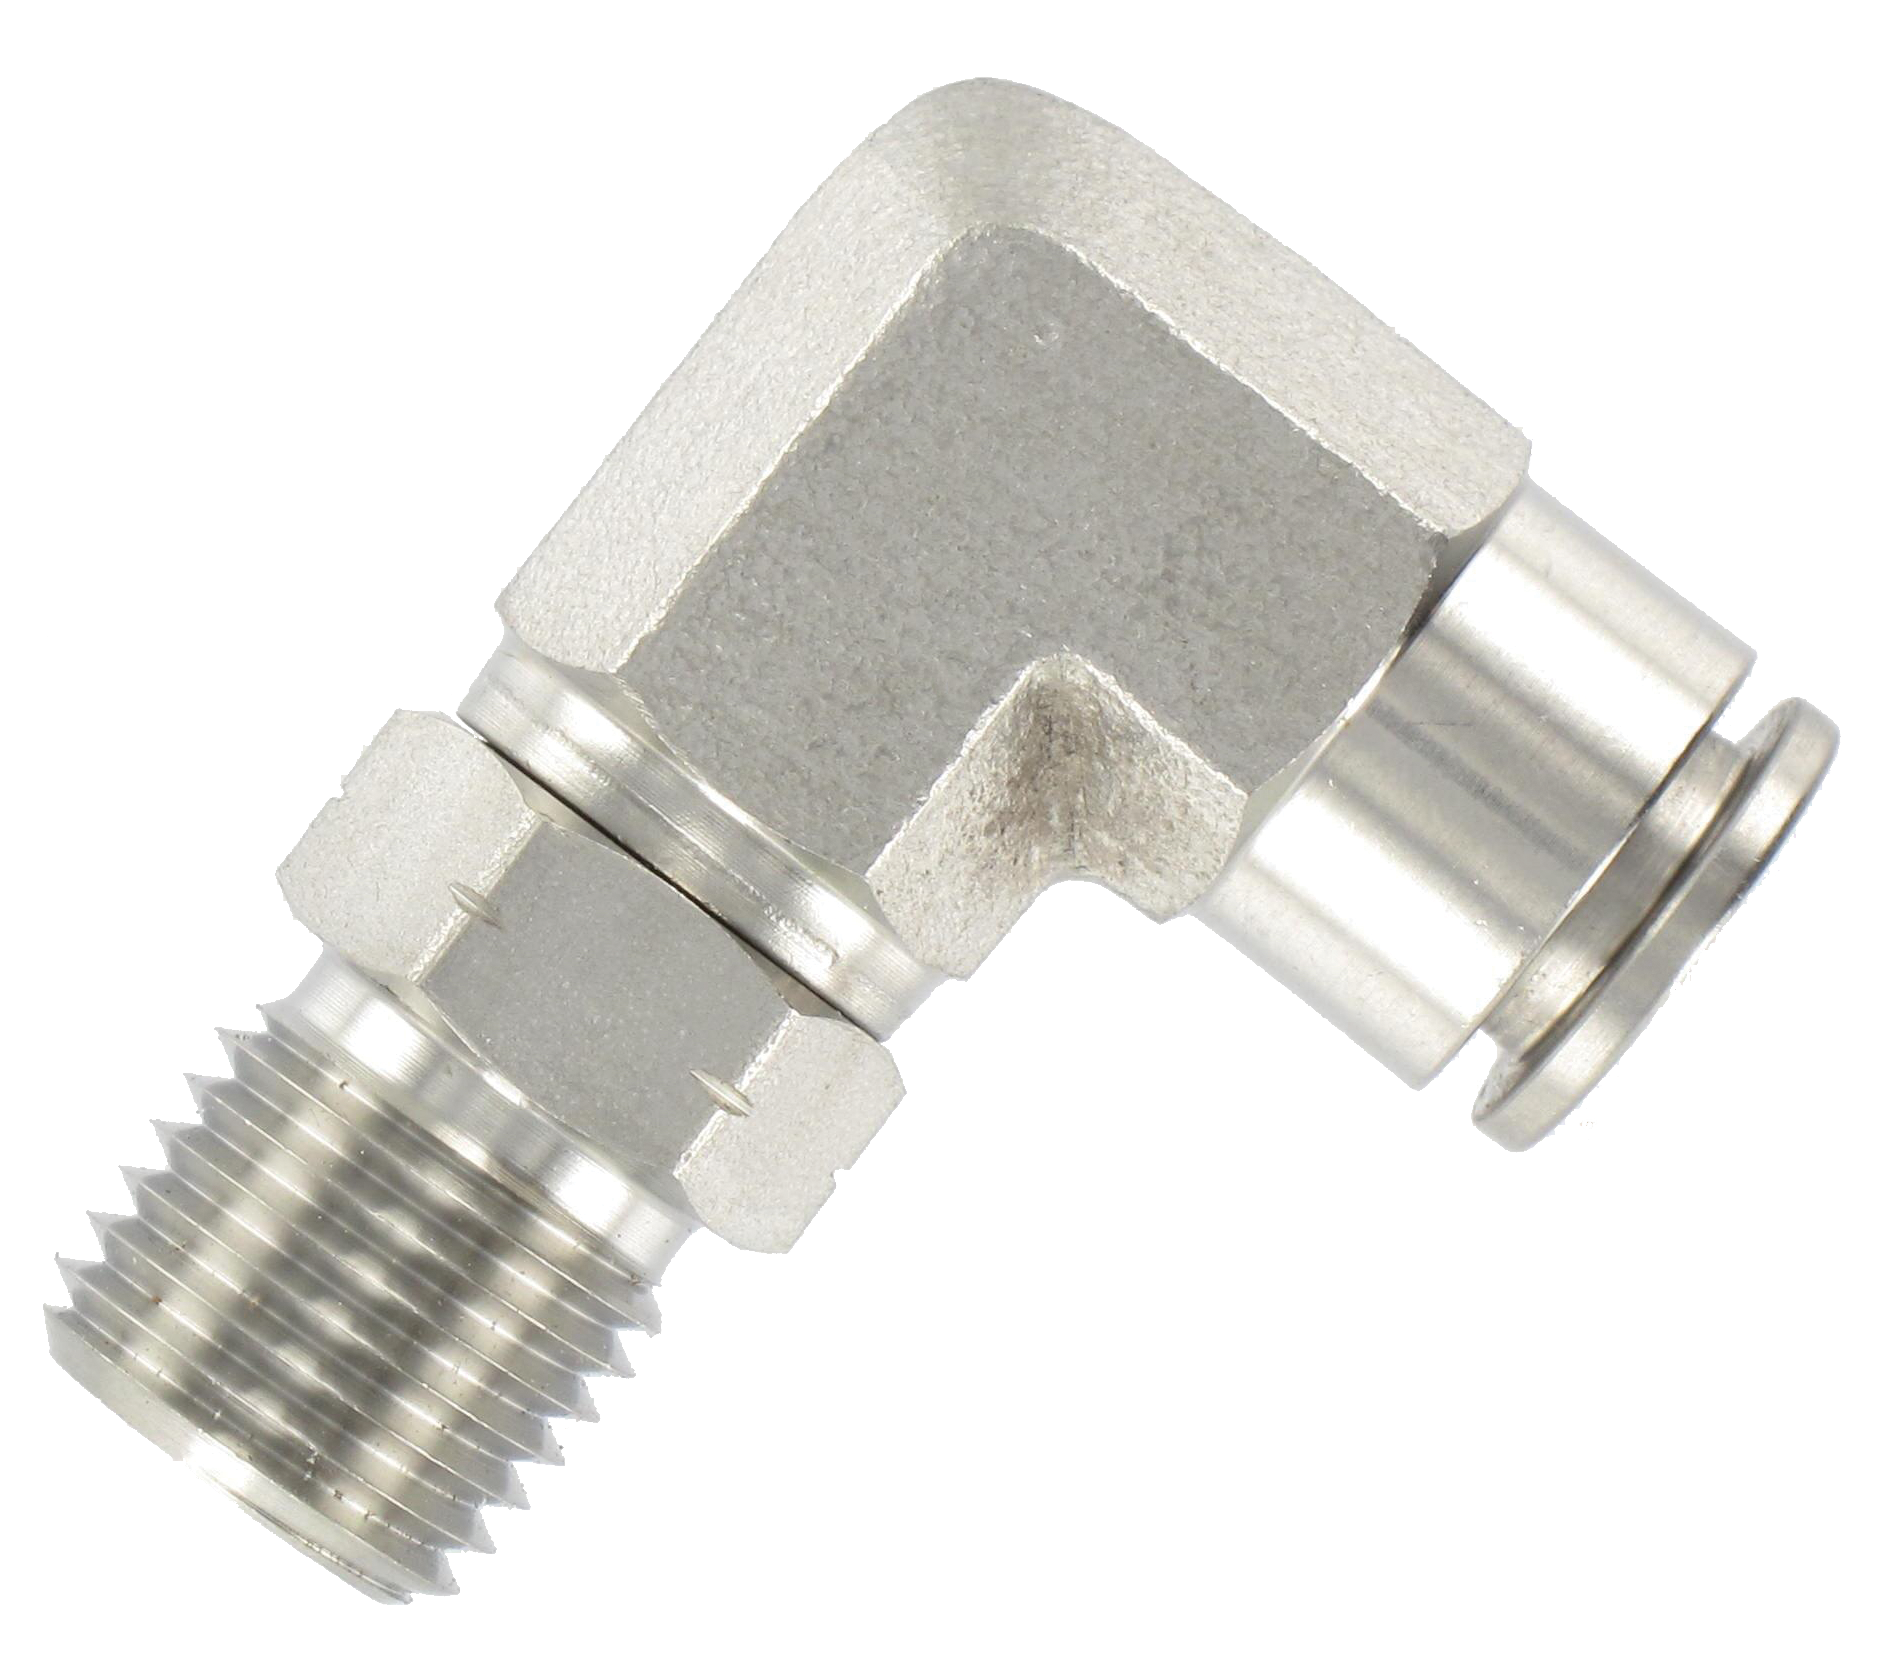 T6 - 1/4\" NPT male swivel stainless steel 316 elbow push-in fittings Pneumatic function fittings